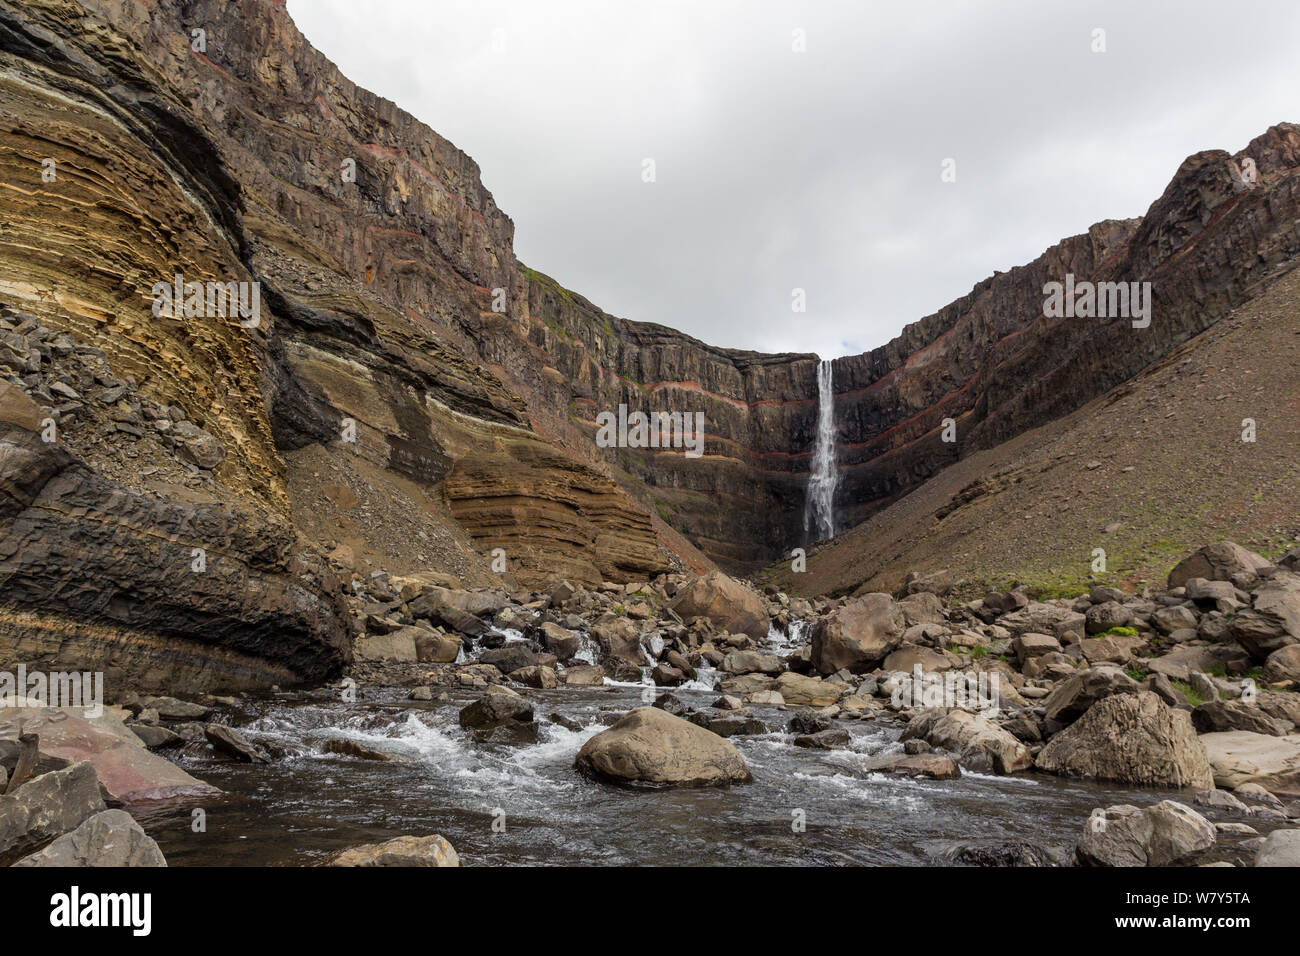 Hengifoss waterfall surrounded by basalt cliffs, Hengifoss, East Iceland, Iceland. August. Stock Photo